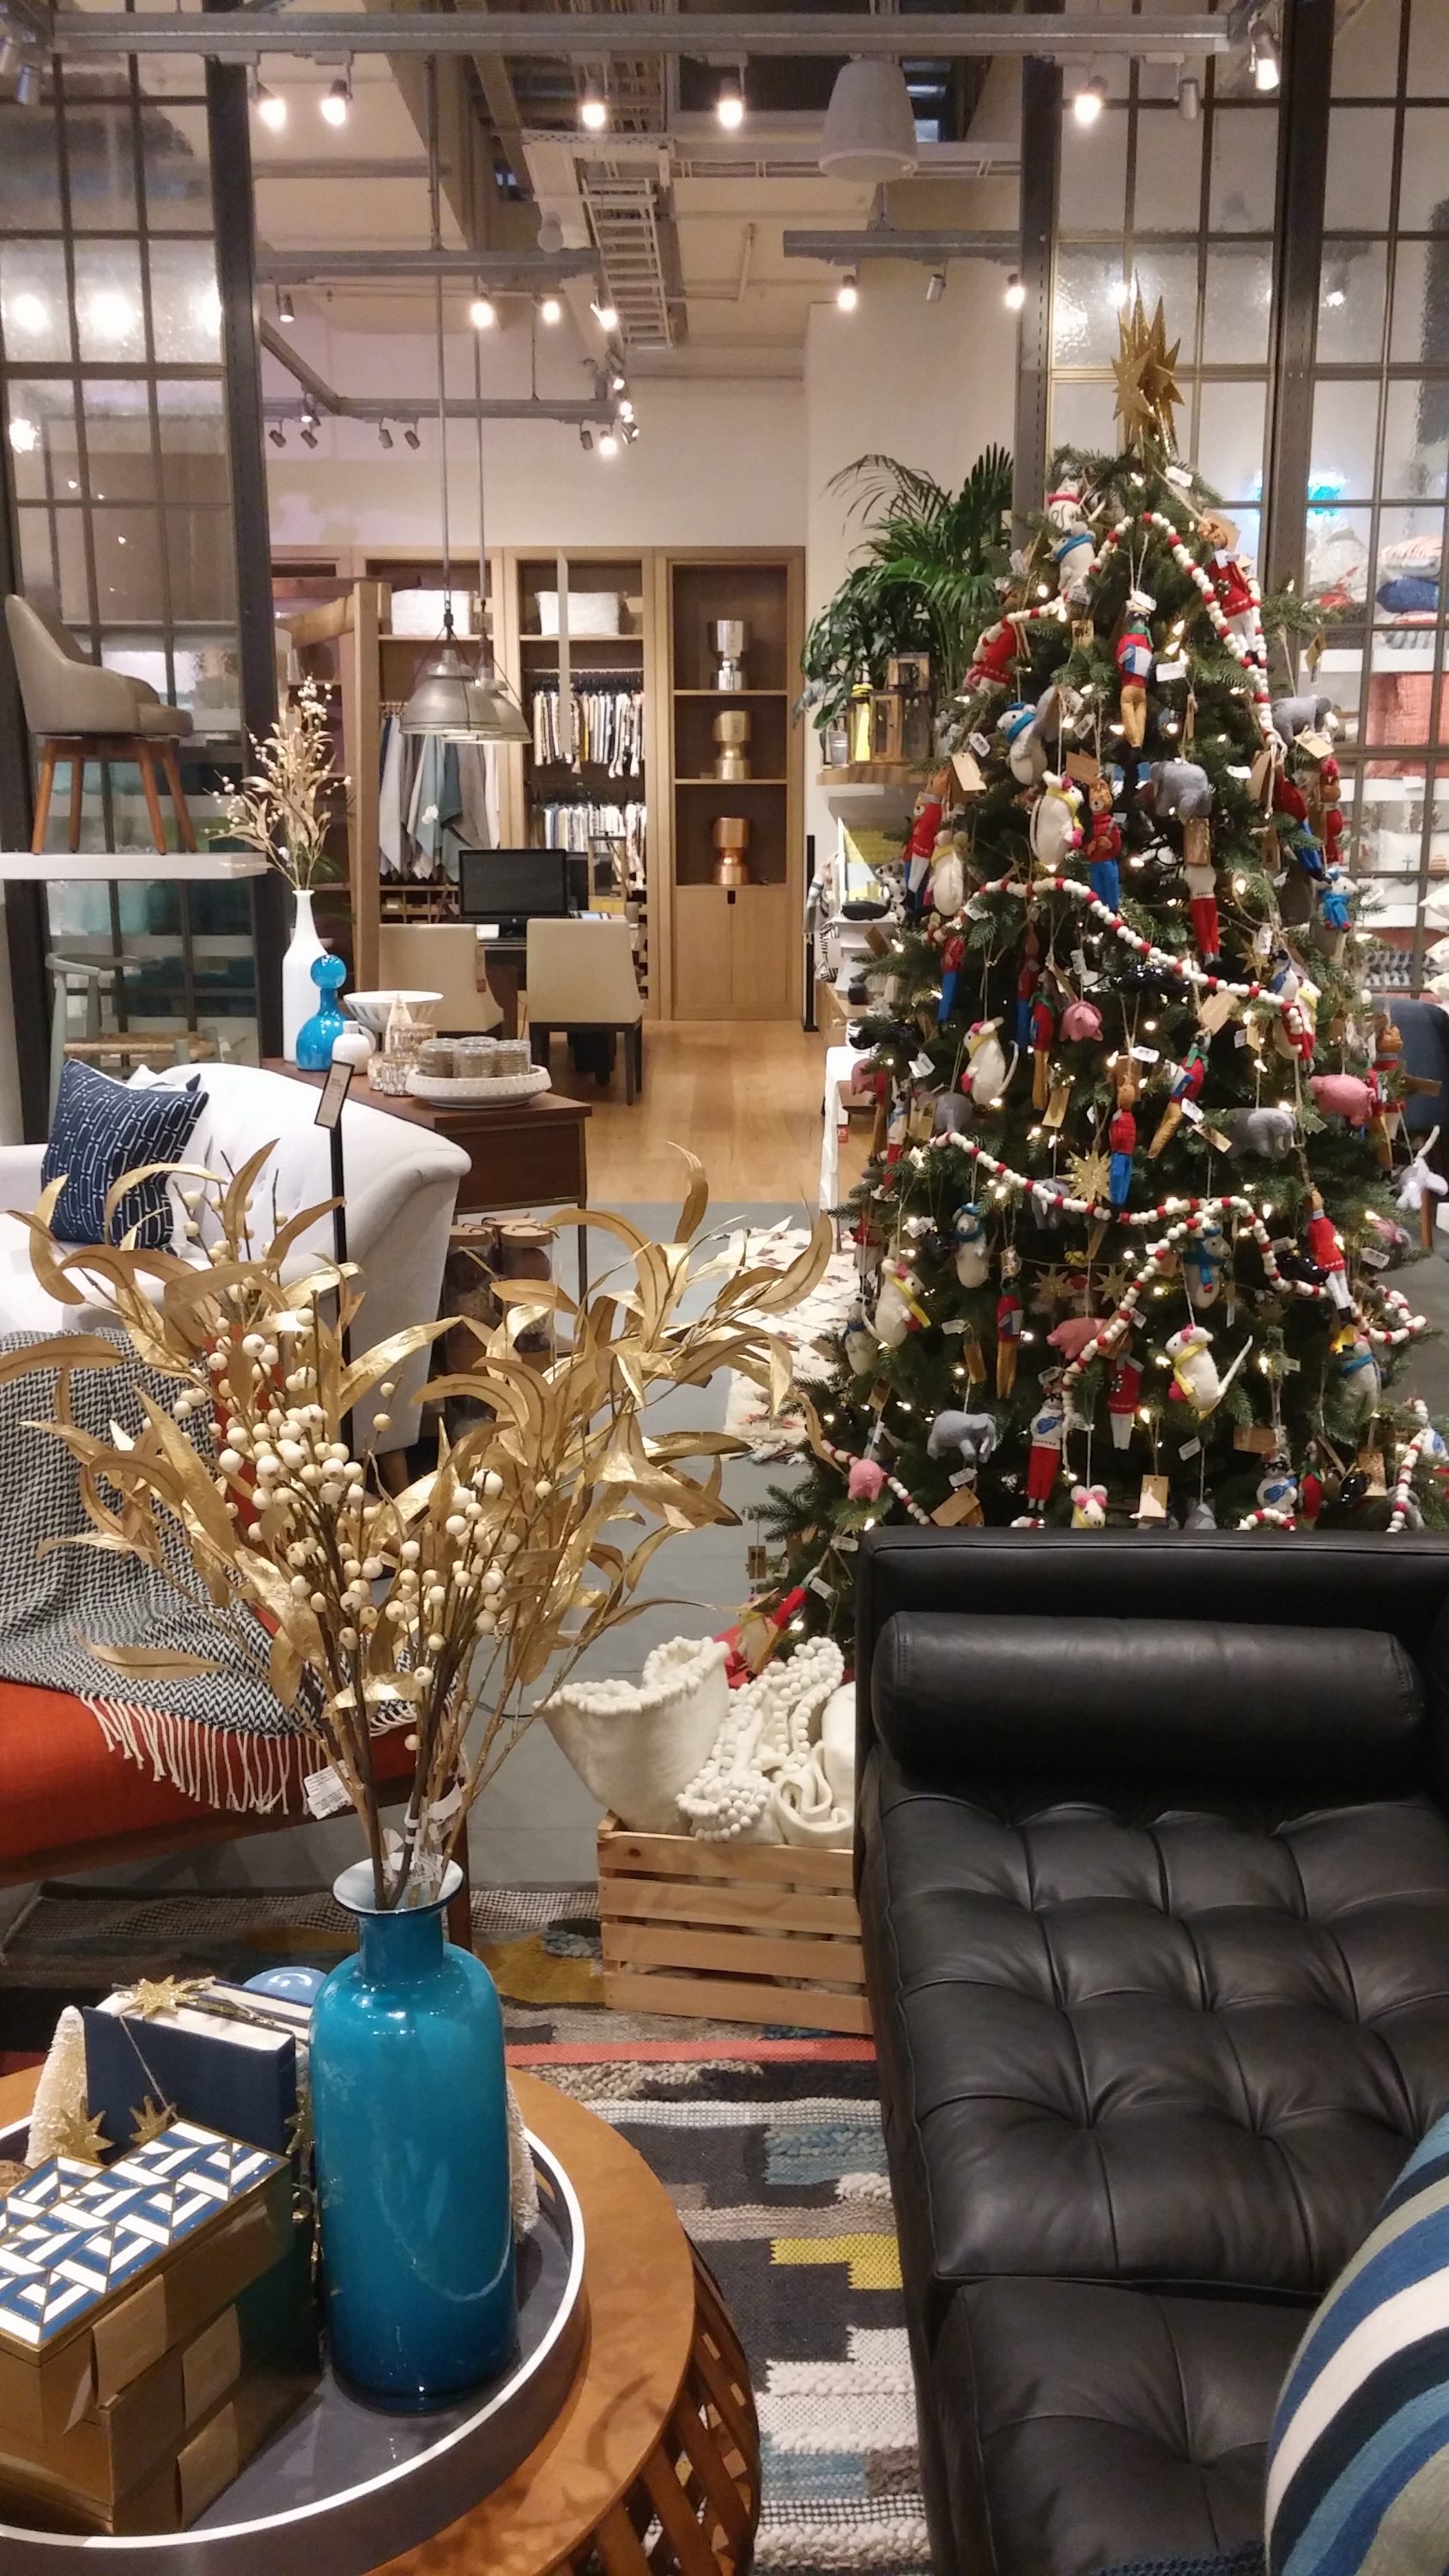 It's very festive at West Elm Chatswood Chase